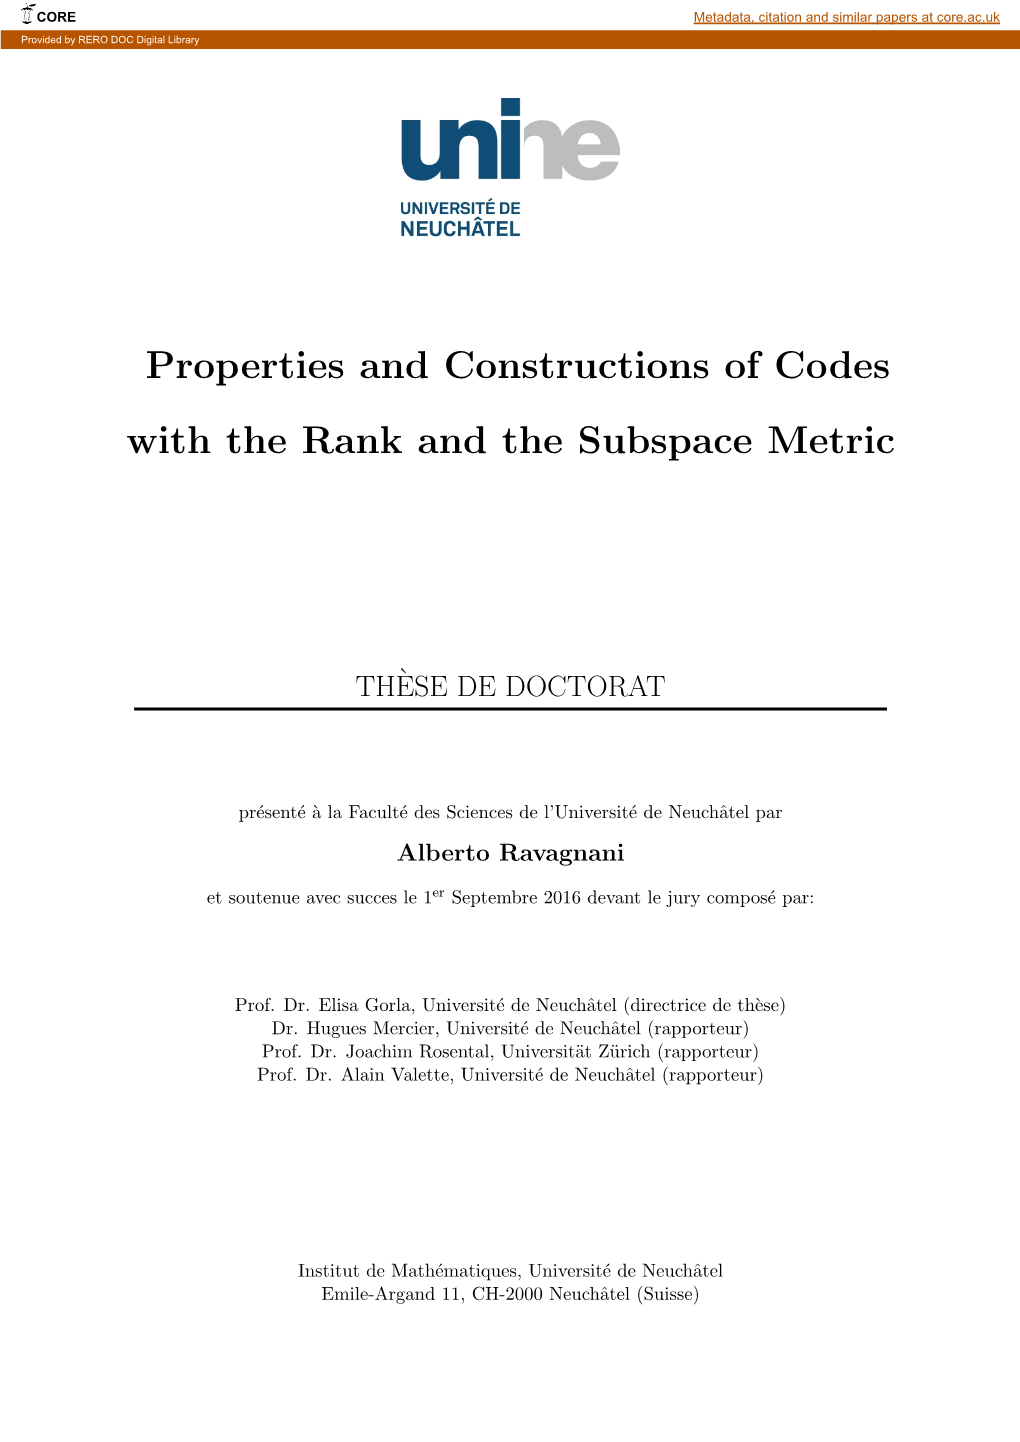 Properties and Constructions of Codes with the Rank and the Subspace Metric